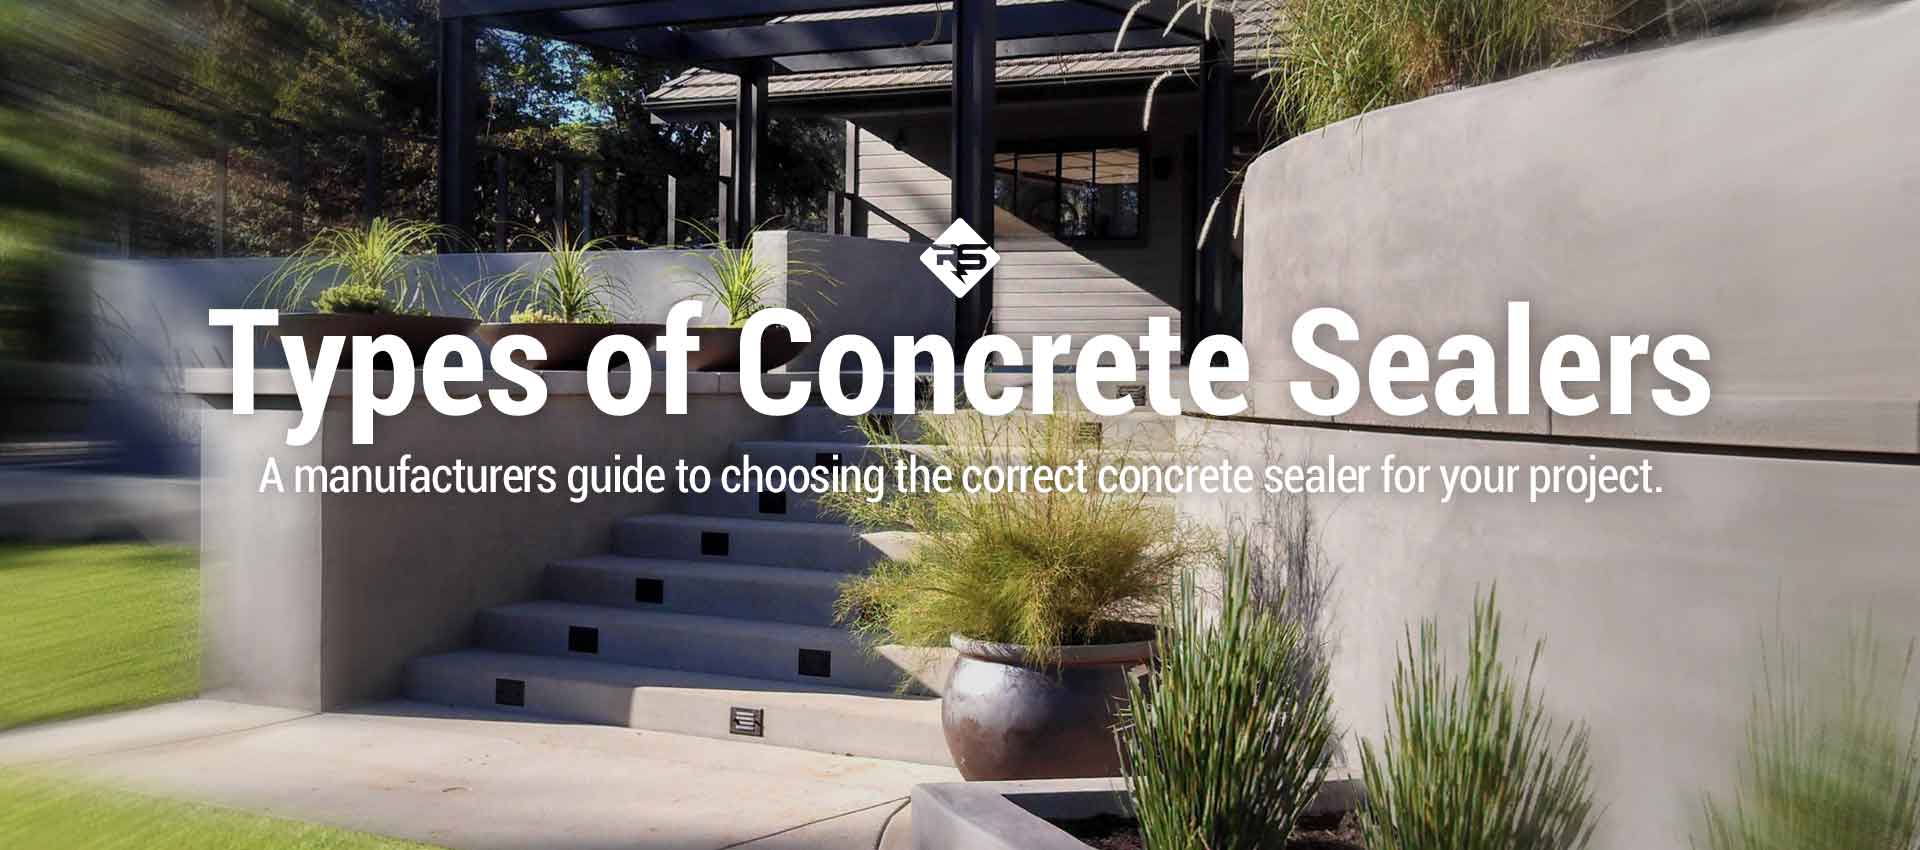 How To Choose the Best Concrete Sealer for Your Project